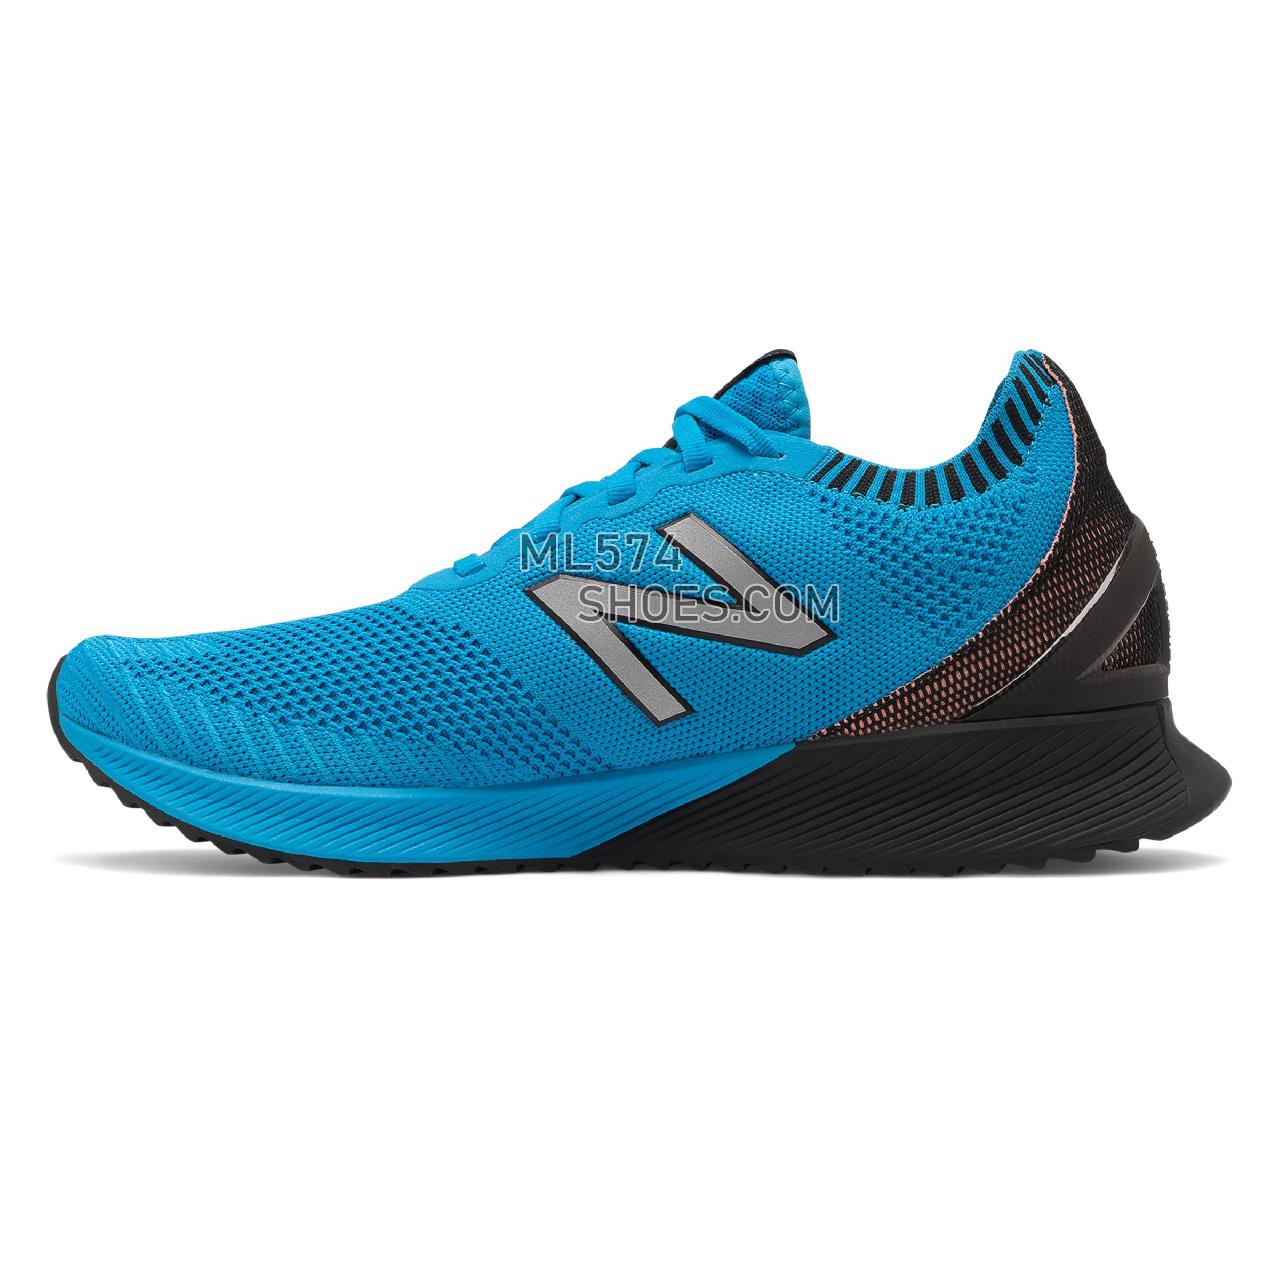 New Balance FuelCell Echo - Men's Neutral Running - Vision Blue with Black - MFCECCV